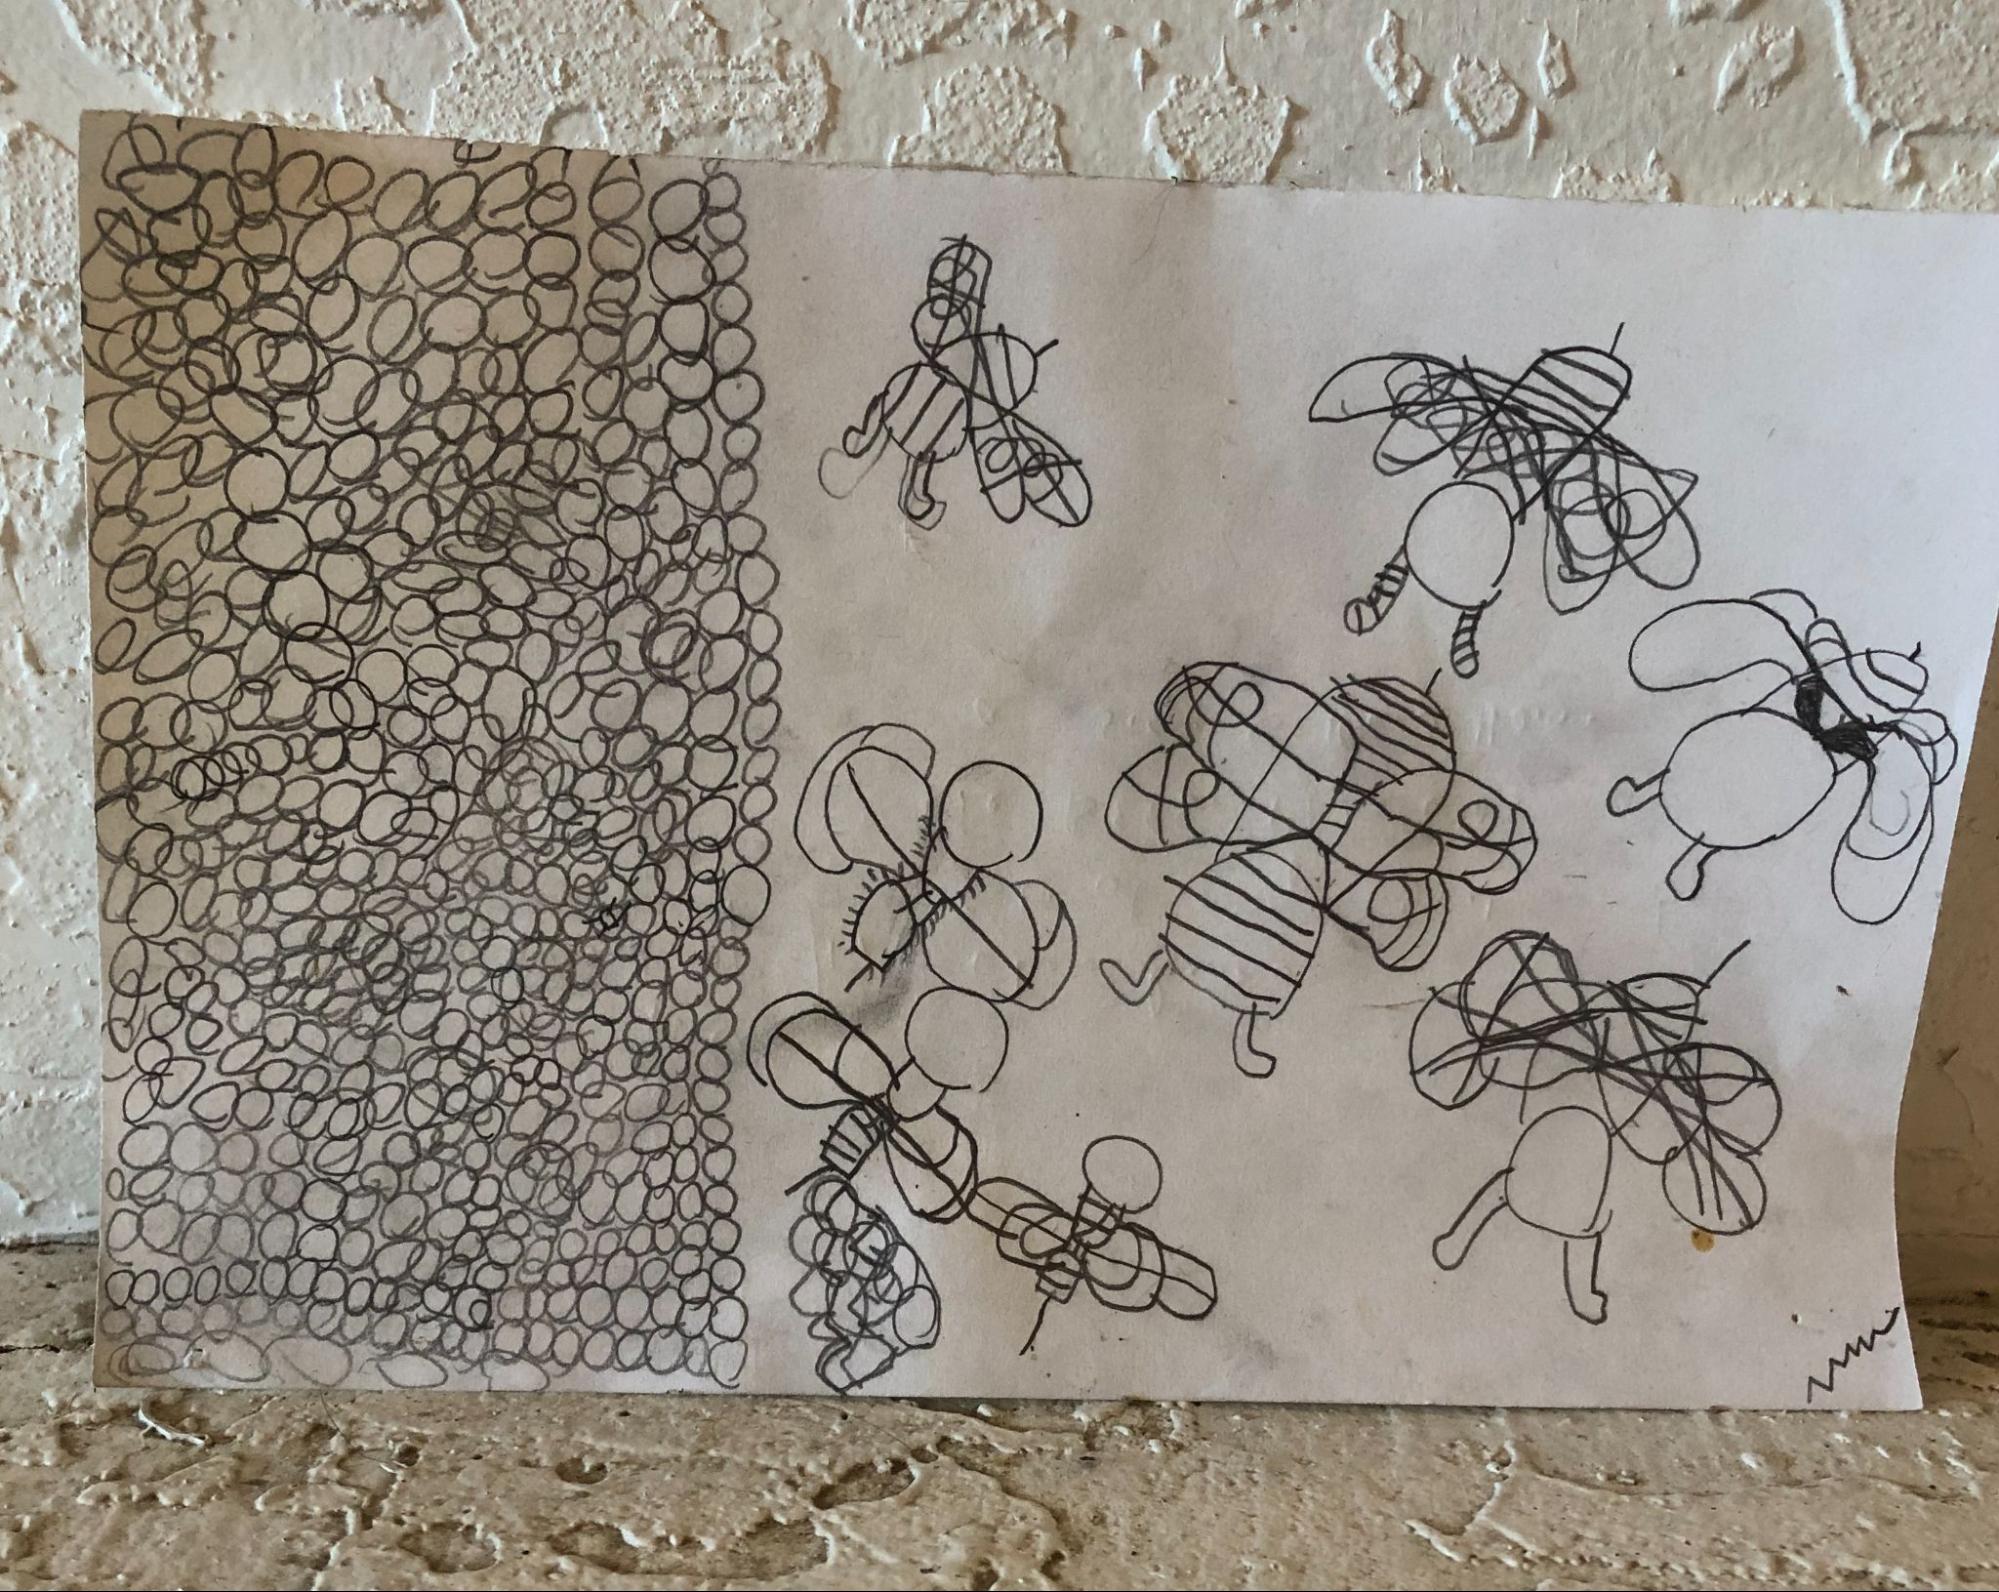 April's son's drawing of bees before the bees came